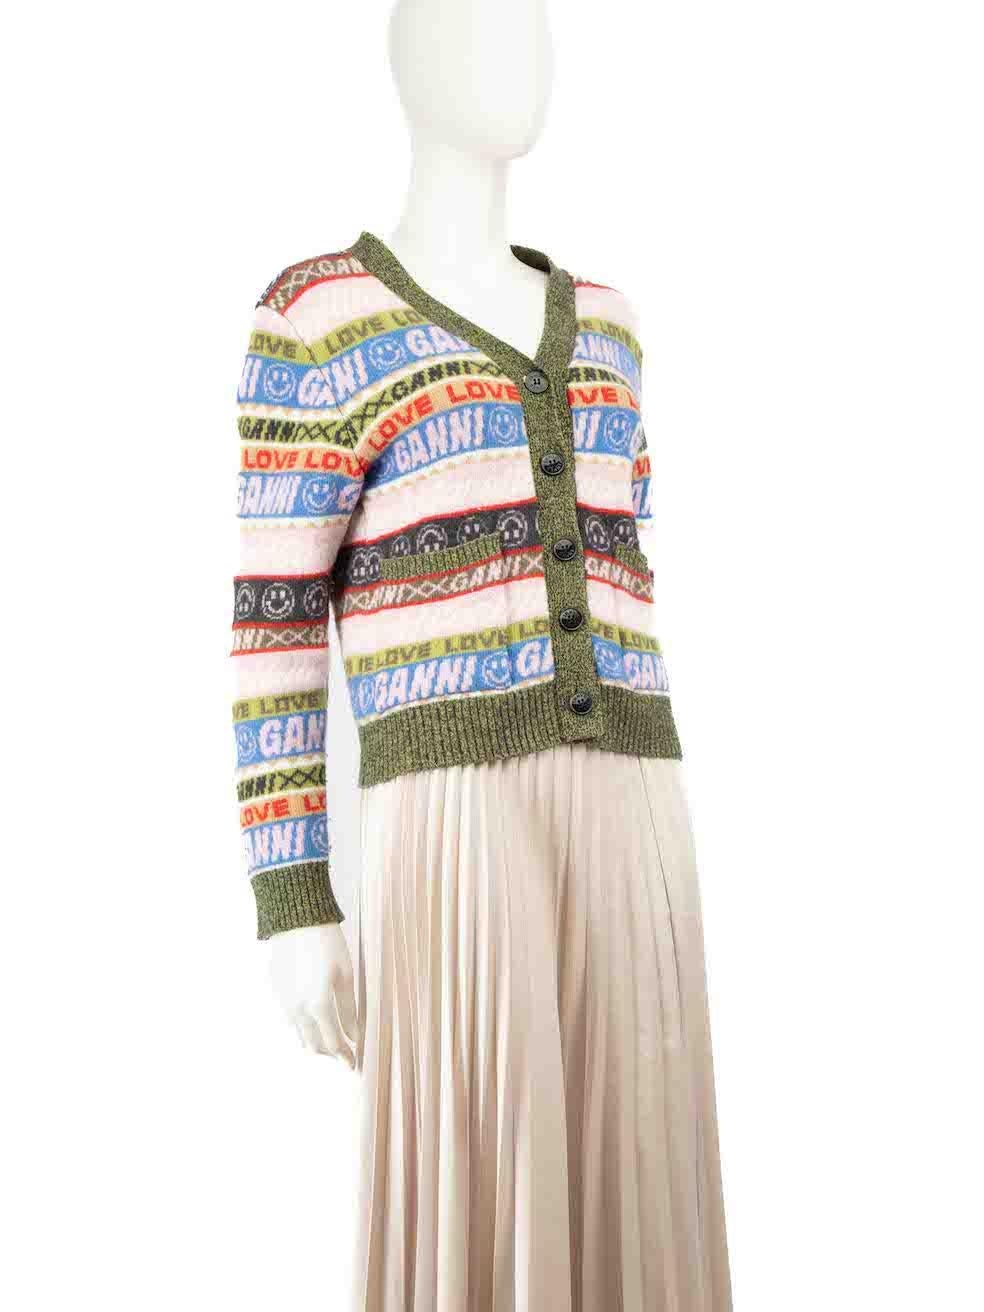 CONDITION is Very good. Minimal wear to cardigan is evident. Minimal pilling to overall material especially around the cuffs on this used Ganni designer resale item.
 
 
 
 Details
 
 
 Multicolour
 
 Wool
 
 Knit cardigan
 
 Logo striped pattern
 
